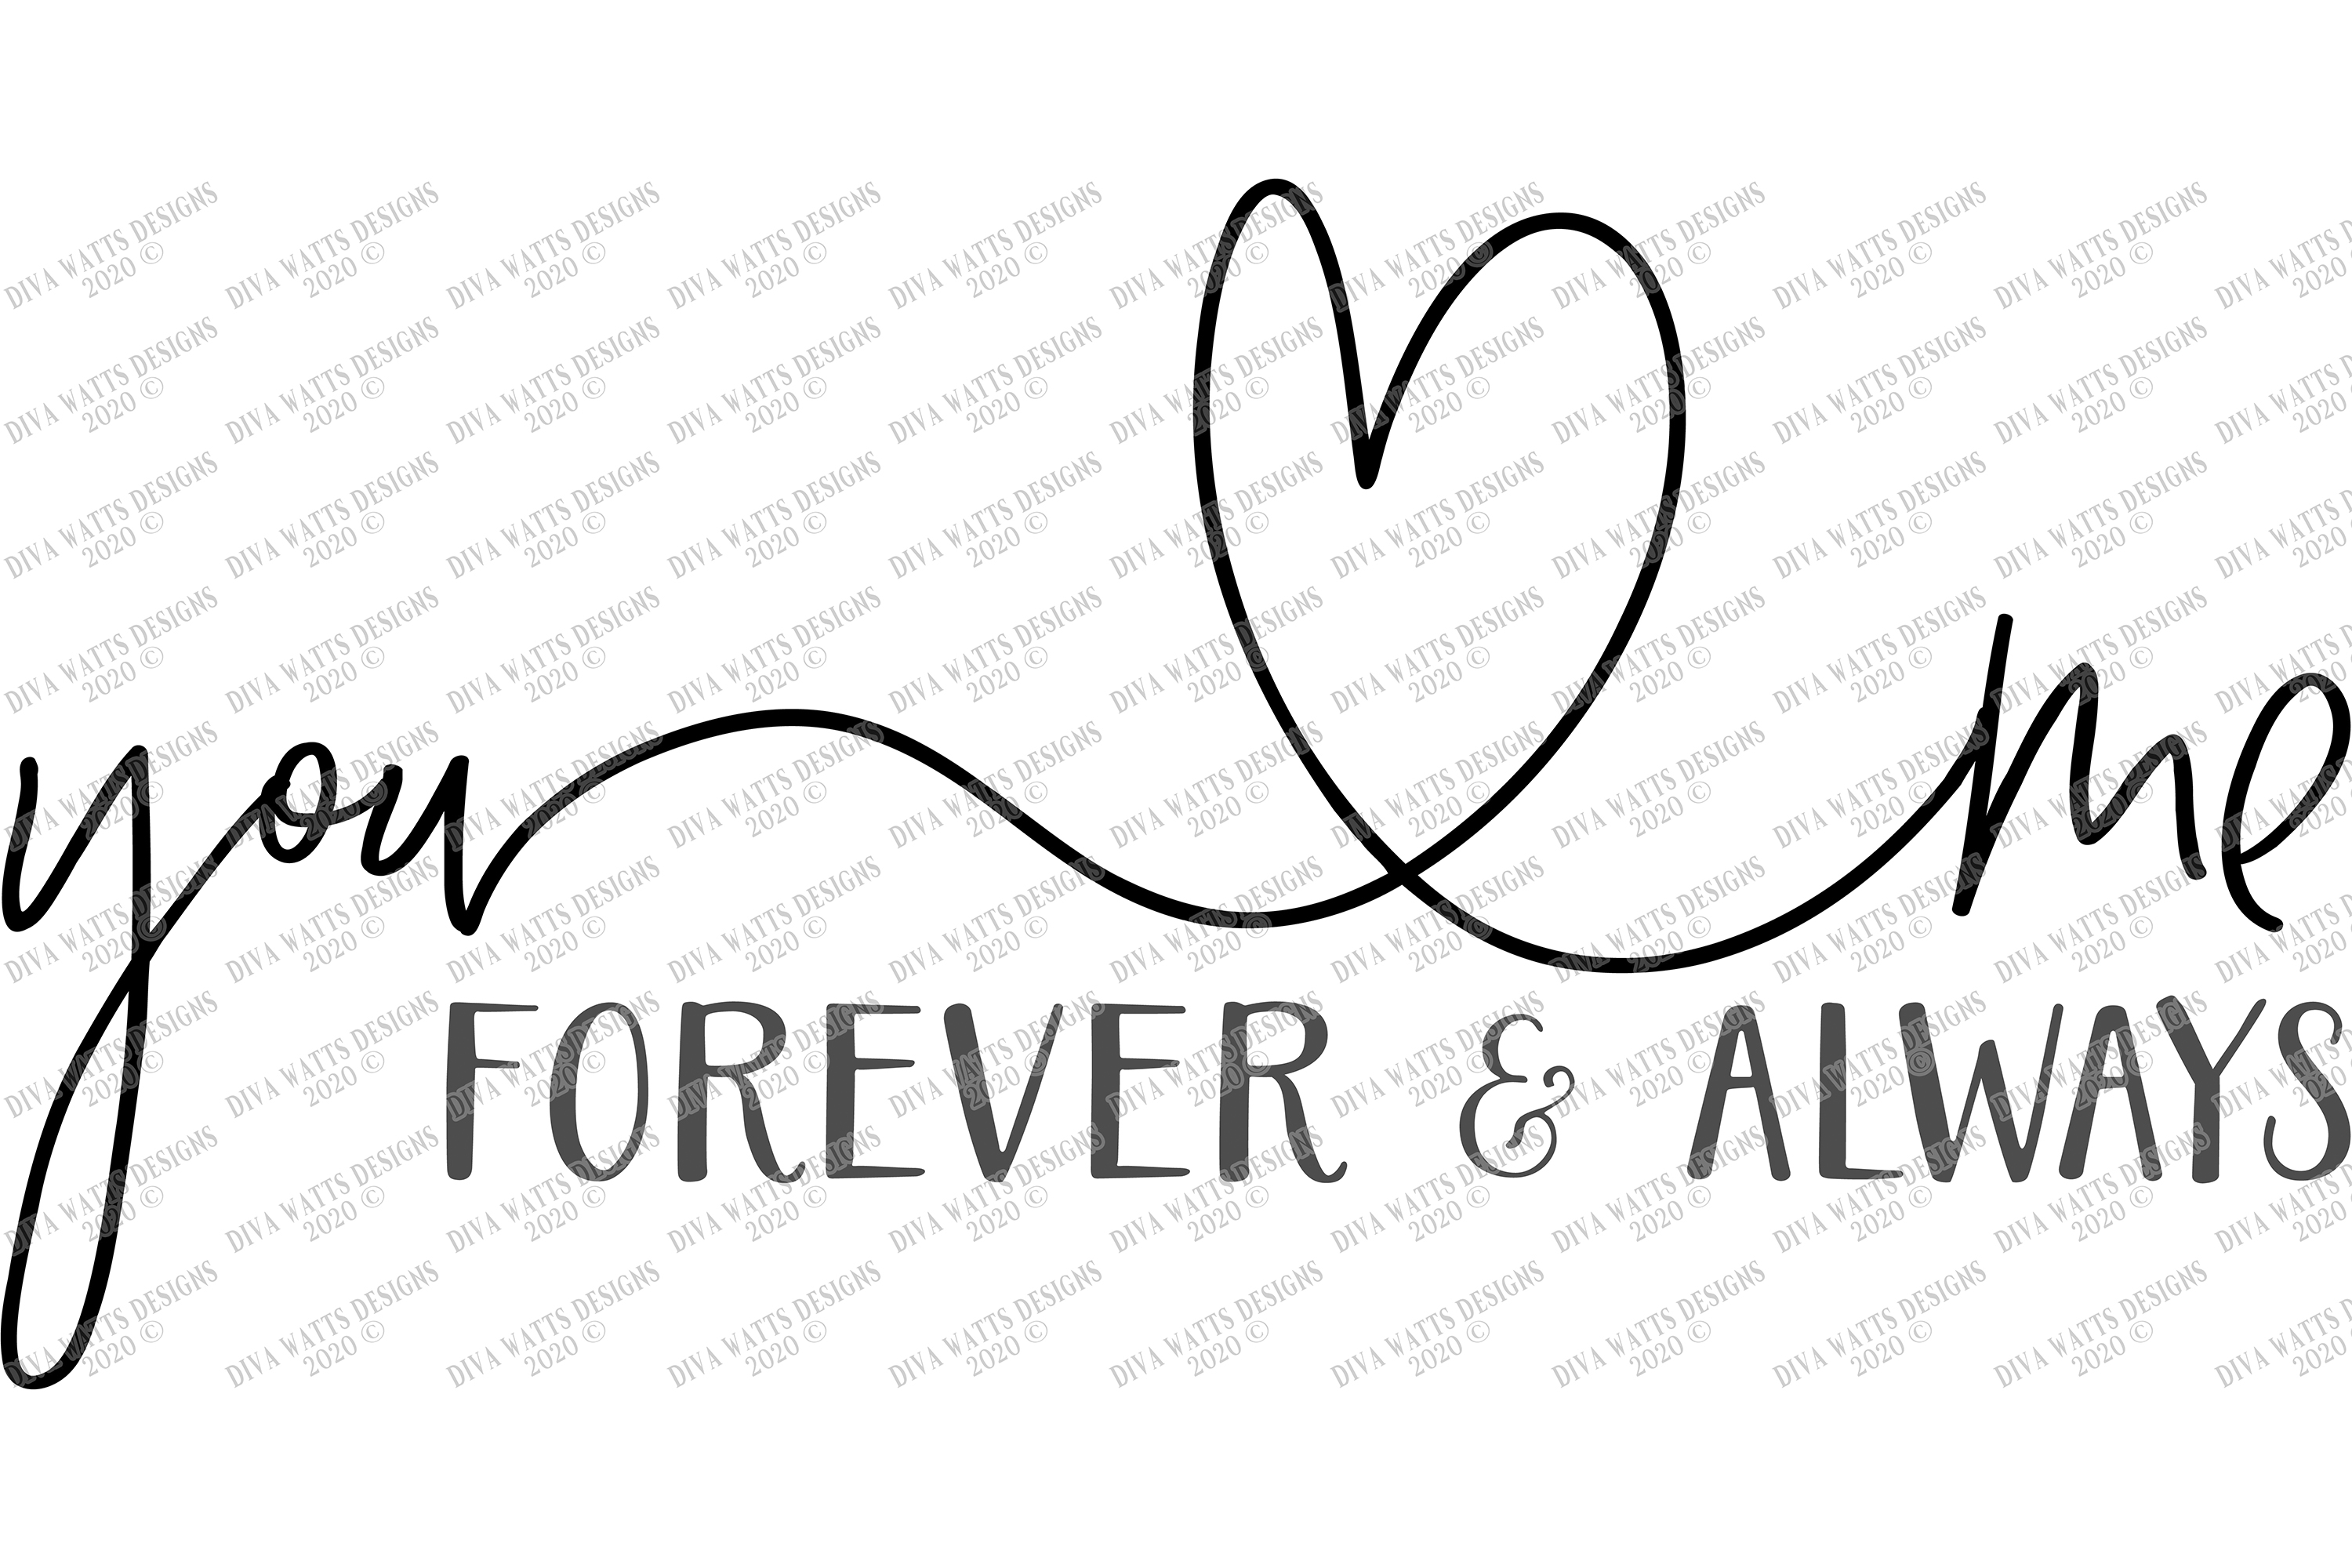 Download You & Me Forever & Always - Love Cutting File SVG EPS PNG